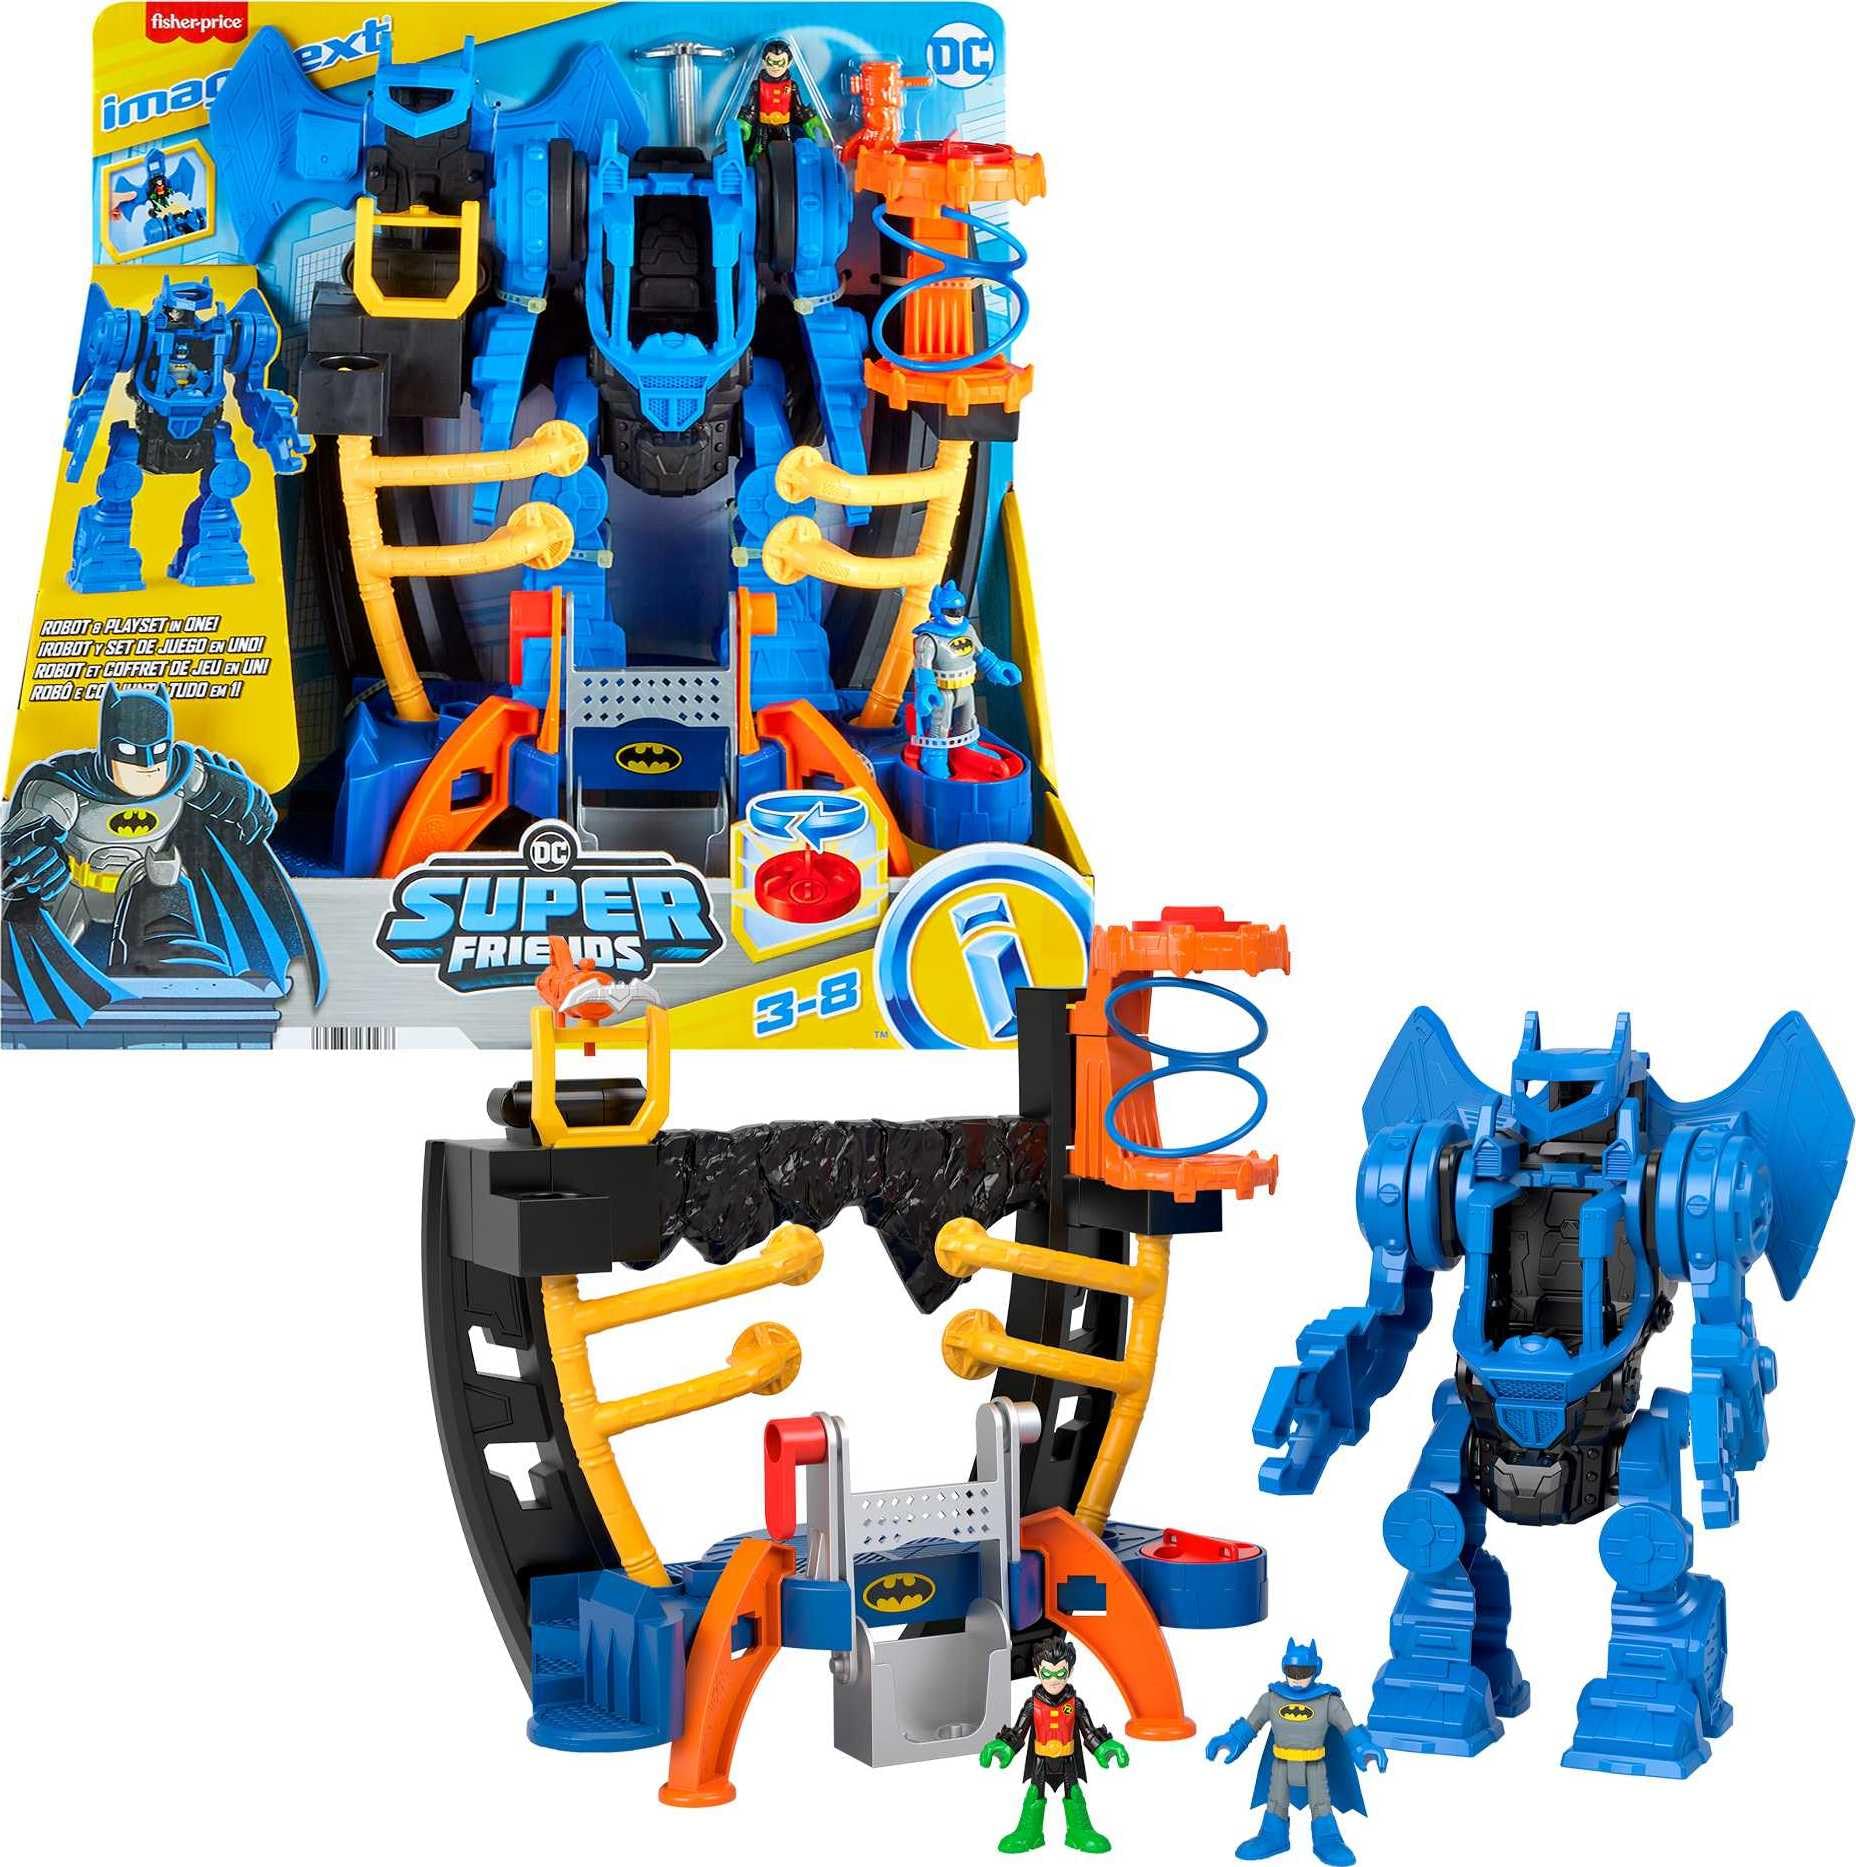 7-Piece Fisher-Price Imaginext DC Super Friends Batman Robo Command Center 2-In-1 Playset w/ 10" Robot $18.50 + Free Shipping w/ Prime or $35+